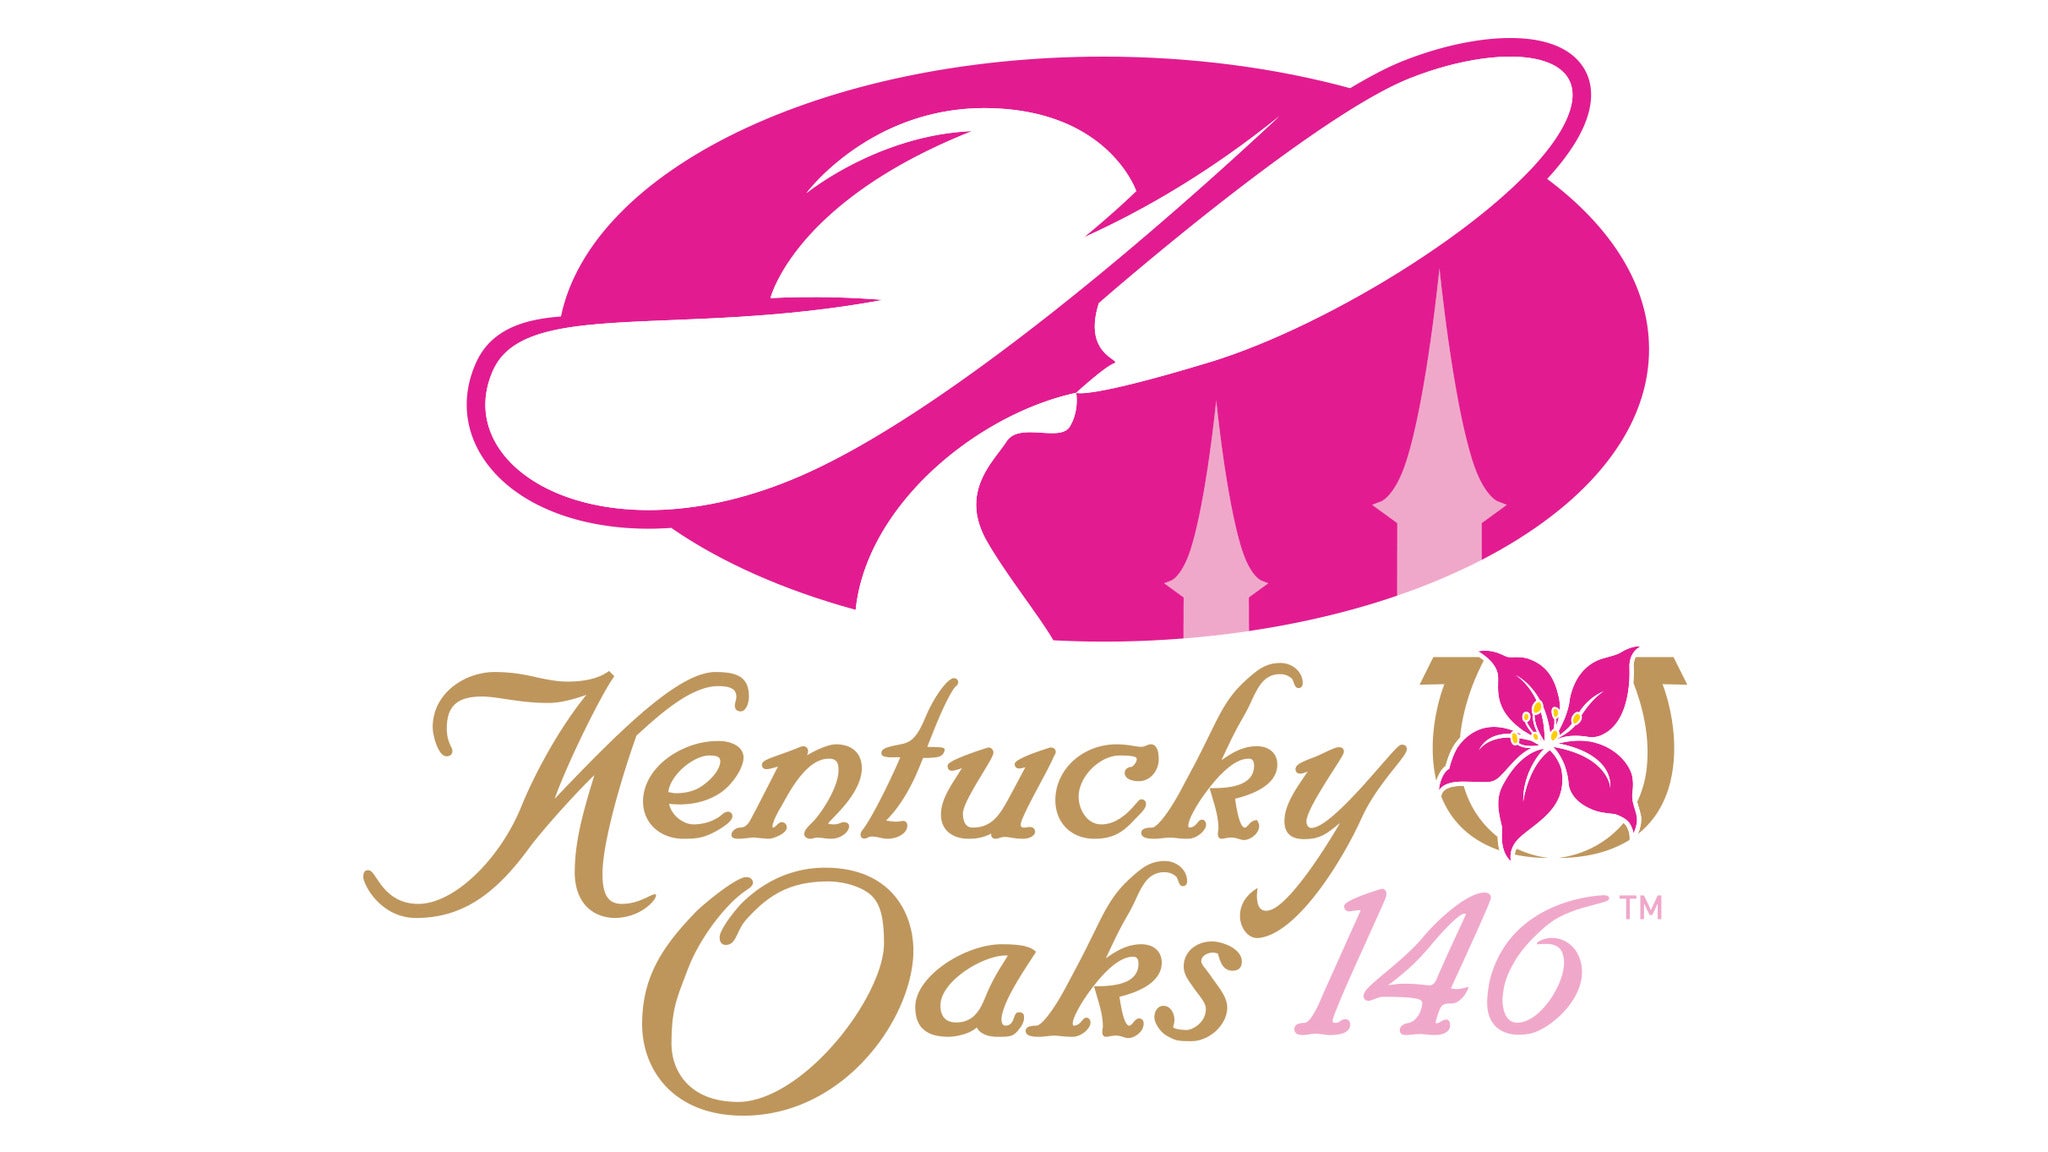 145th Kentucky Oaks - Infield & Paddock General Admission Single Day in Louisville promo photo for Standard Purchase Pricing presale offer code